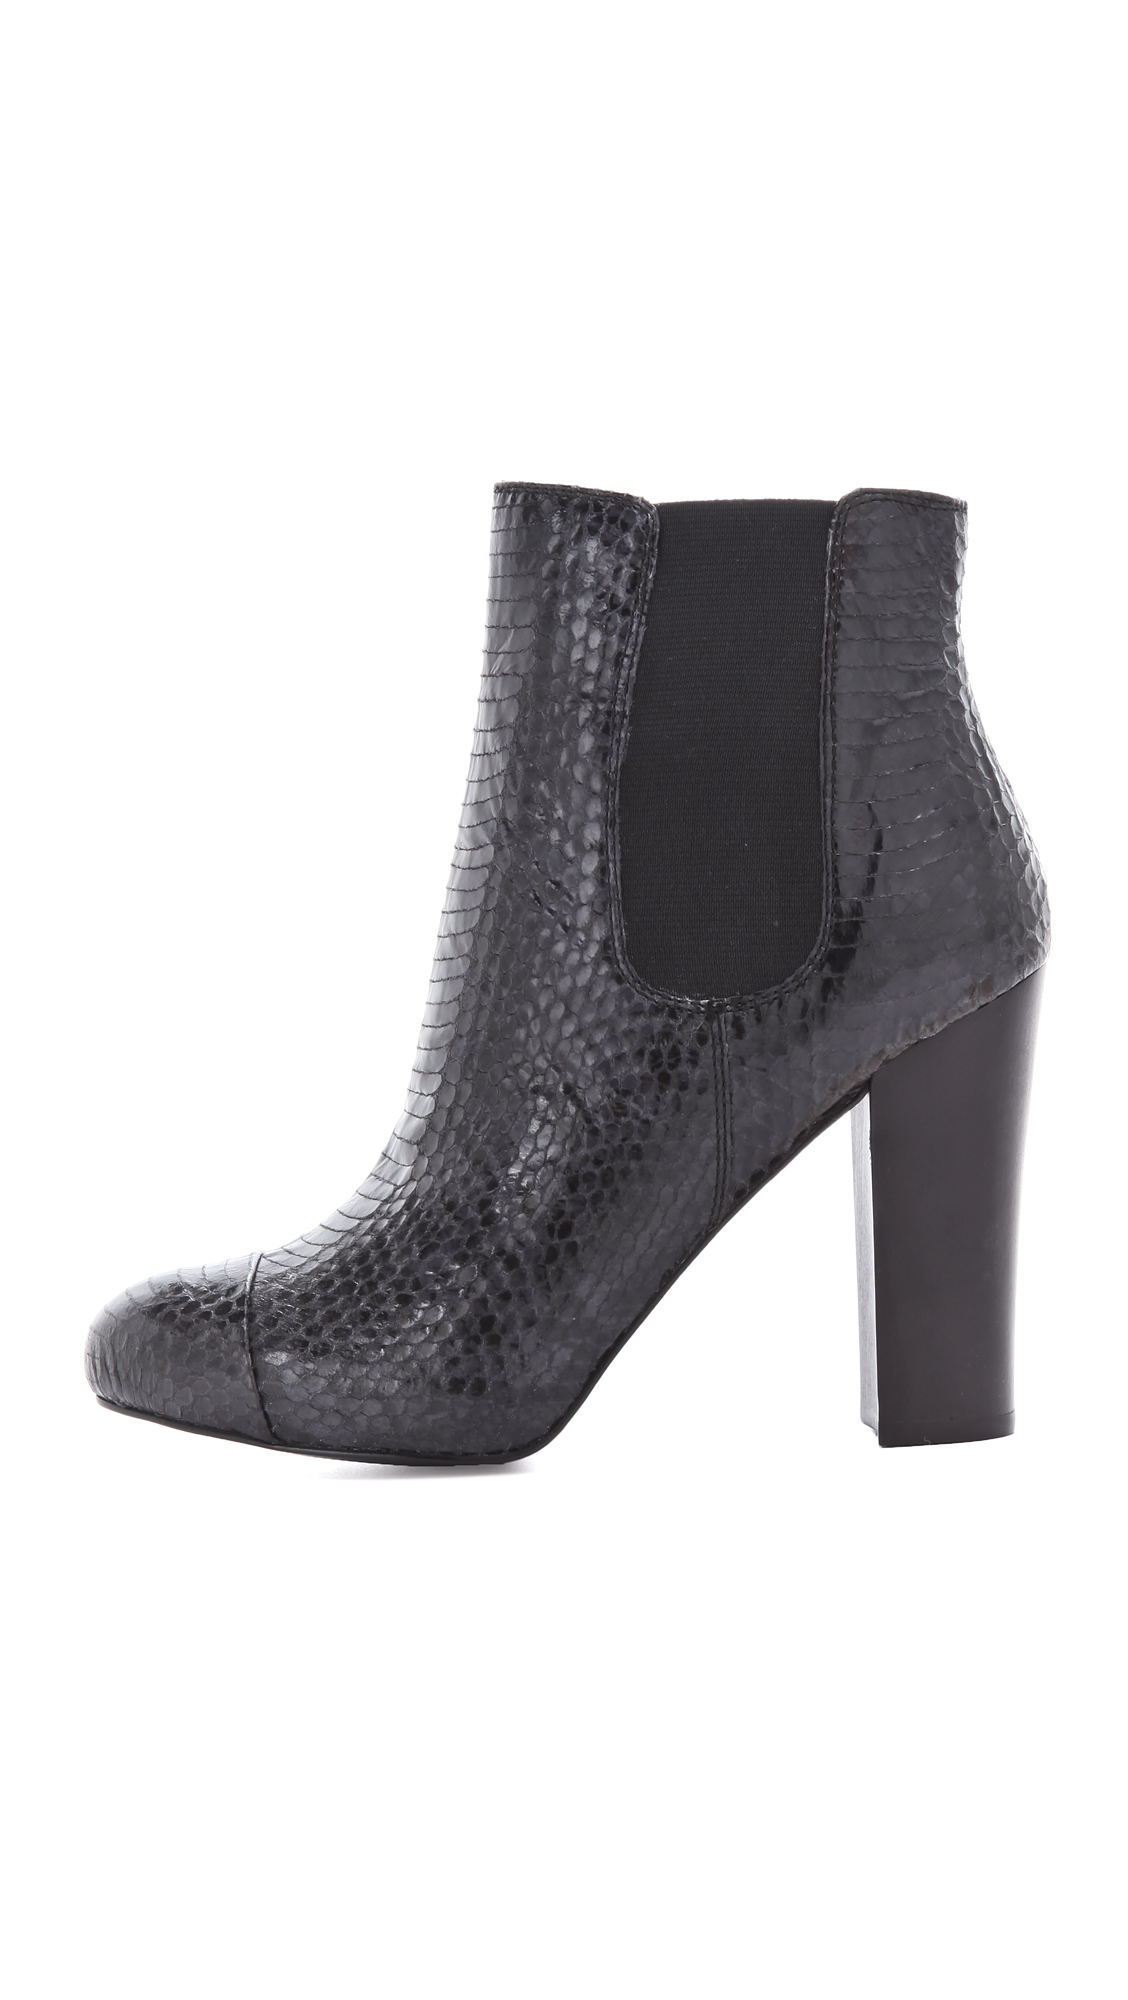 Lyst - Juicy Couture Roxanna Snake Print Booties in Black